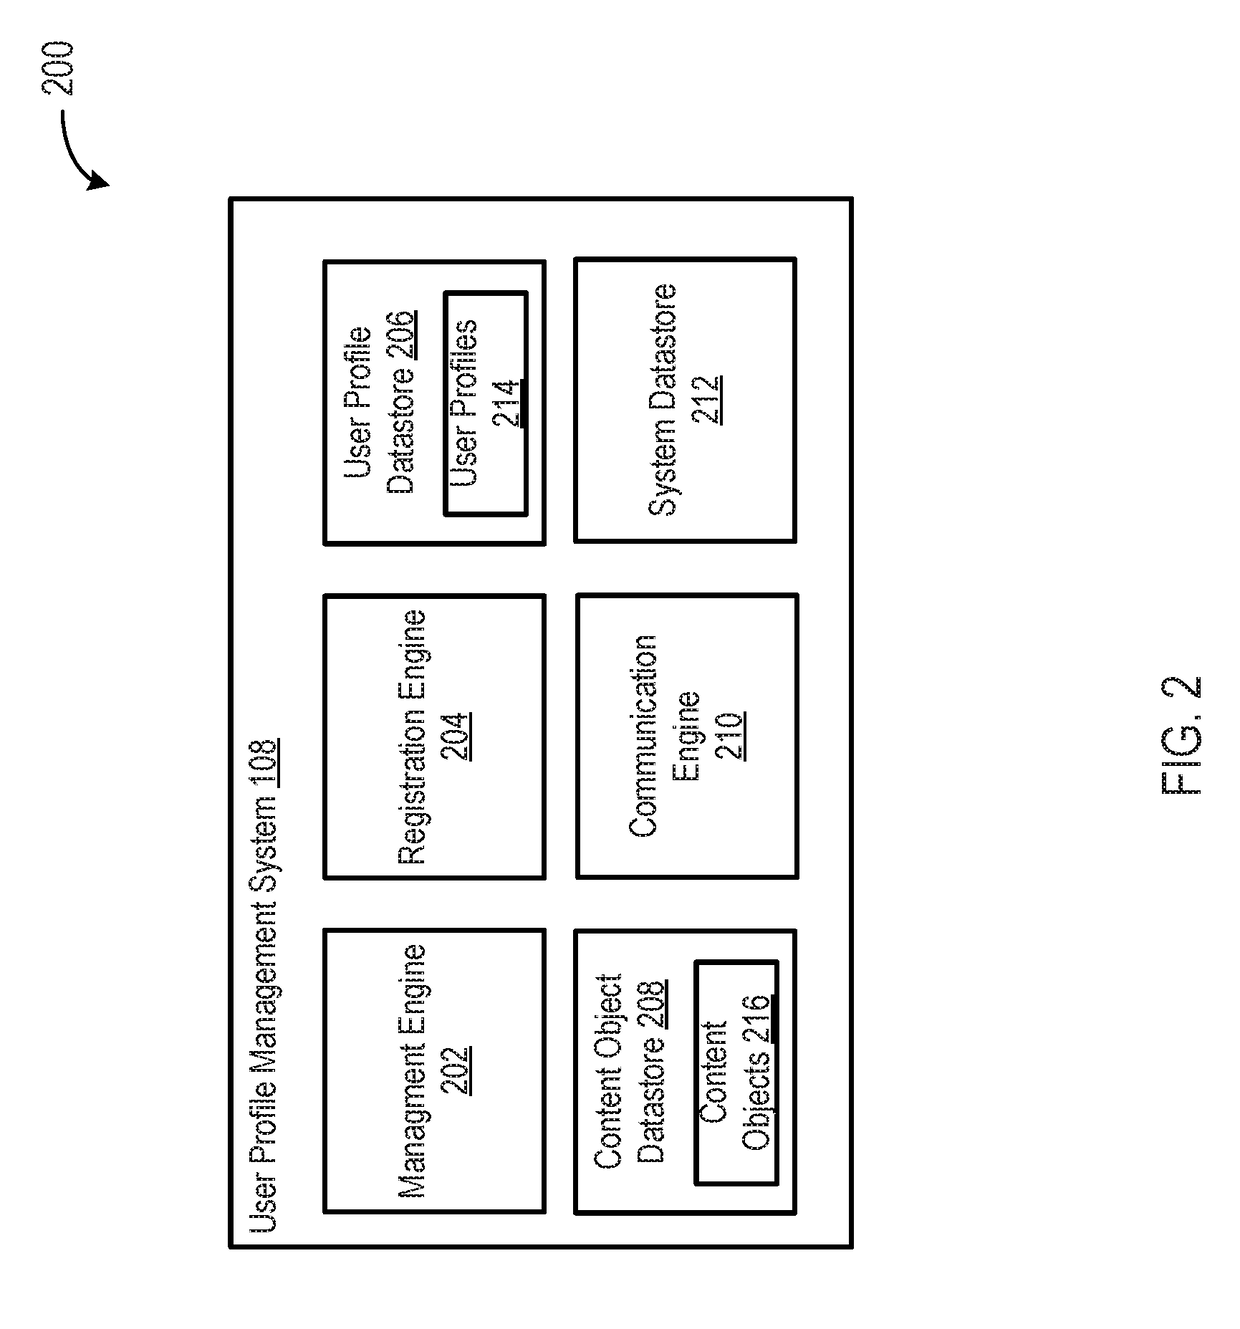 Systems and methods for content object optimization